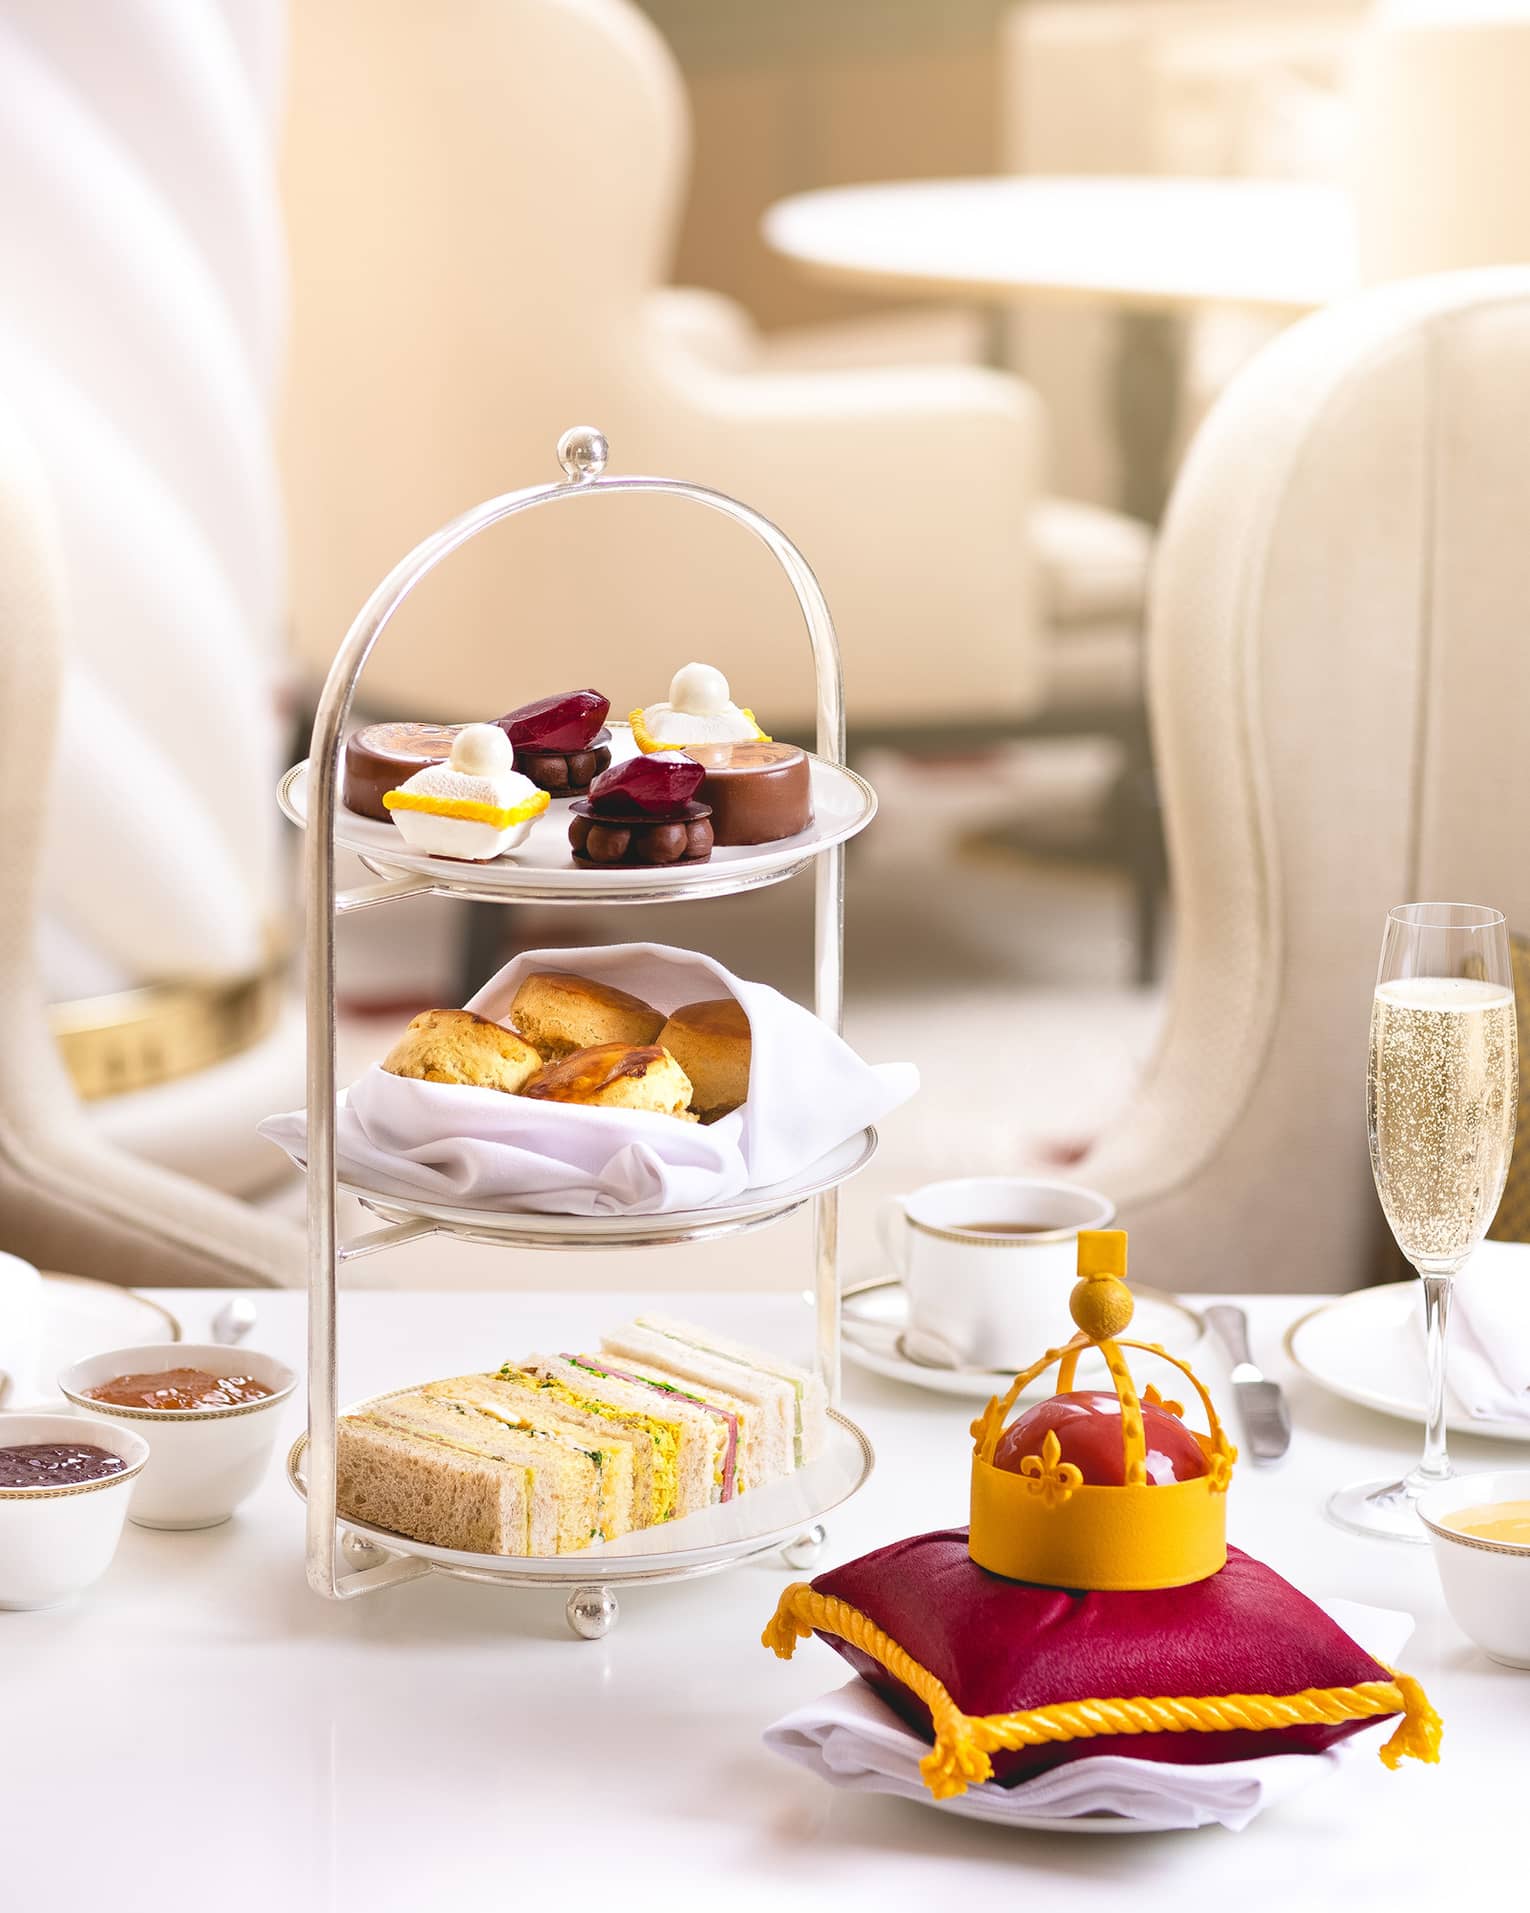 Crown Jewels-themed Afternoon Tea spread with a small replica crown on a burgundy pillow